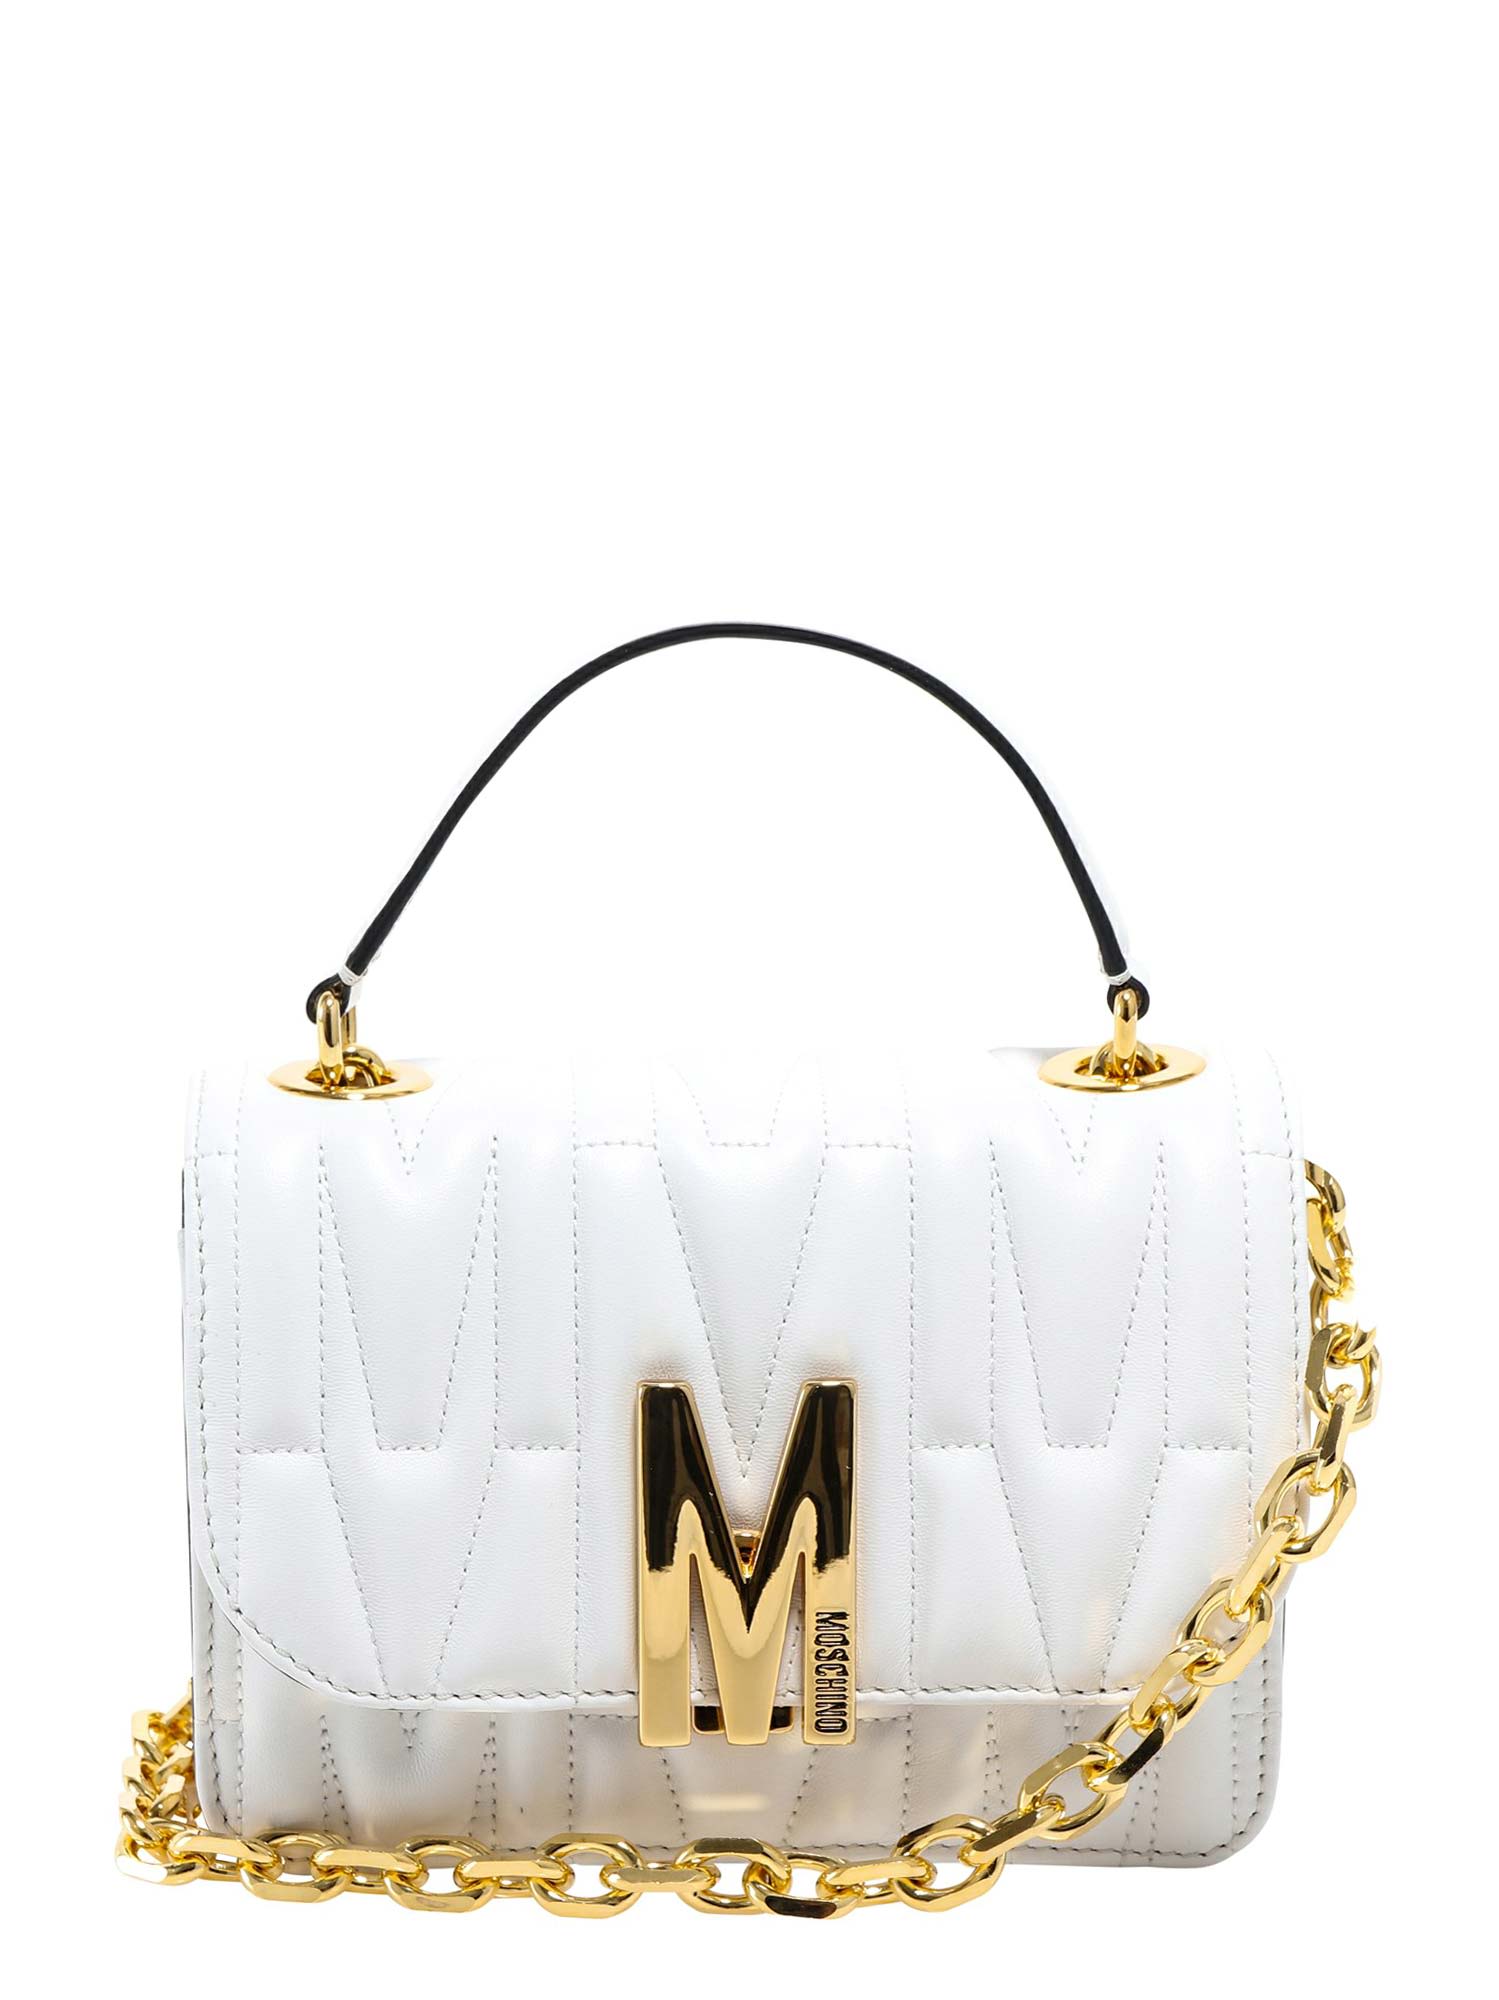 Moschino Shoulder Bags | italist, ALWAYS LIKE A SALE